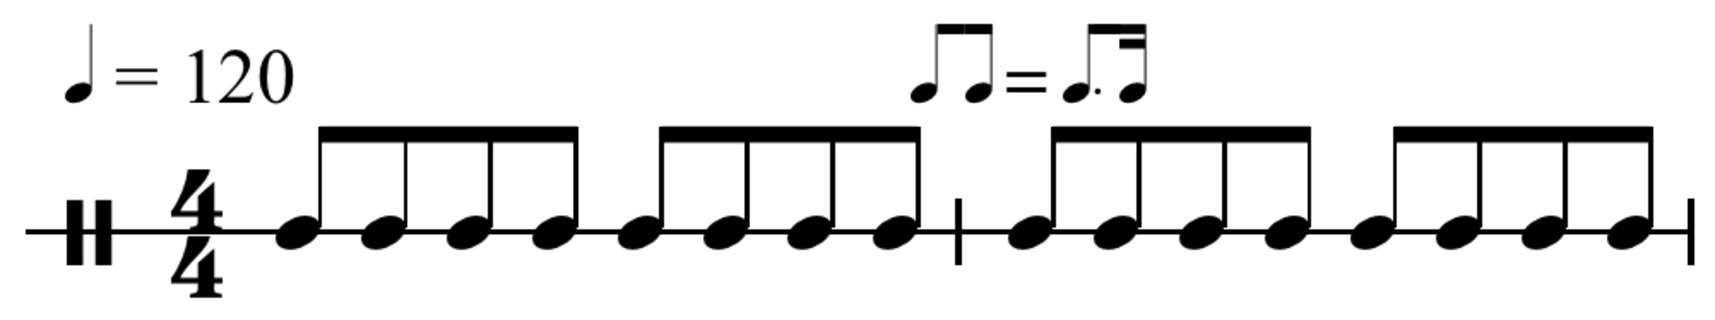 How many 16th notes in quarter note